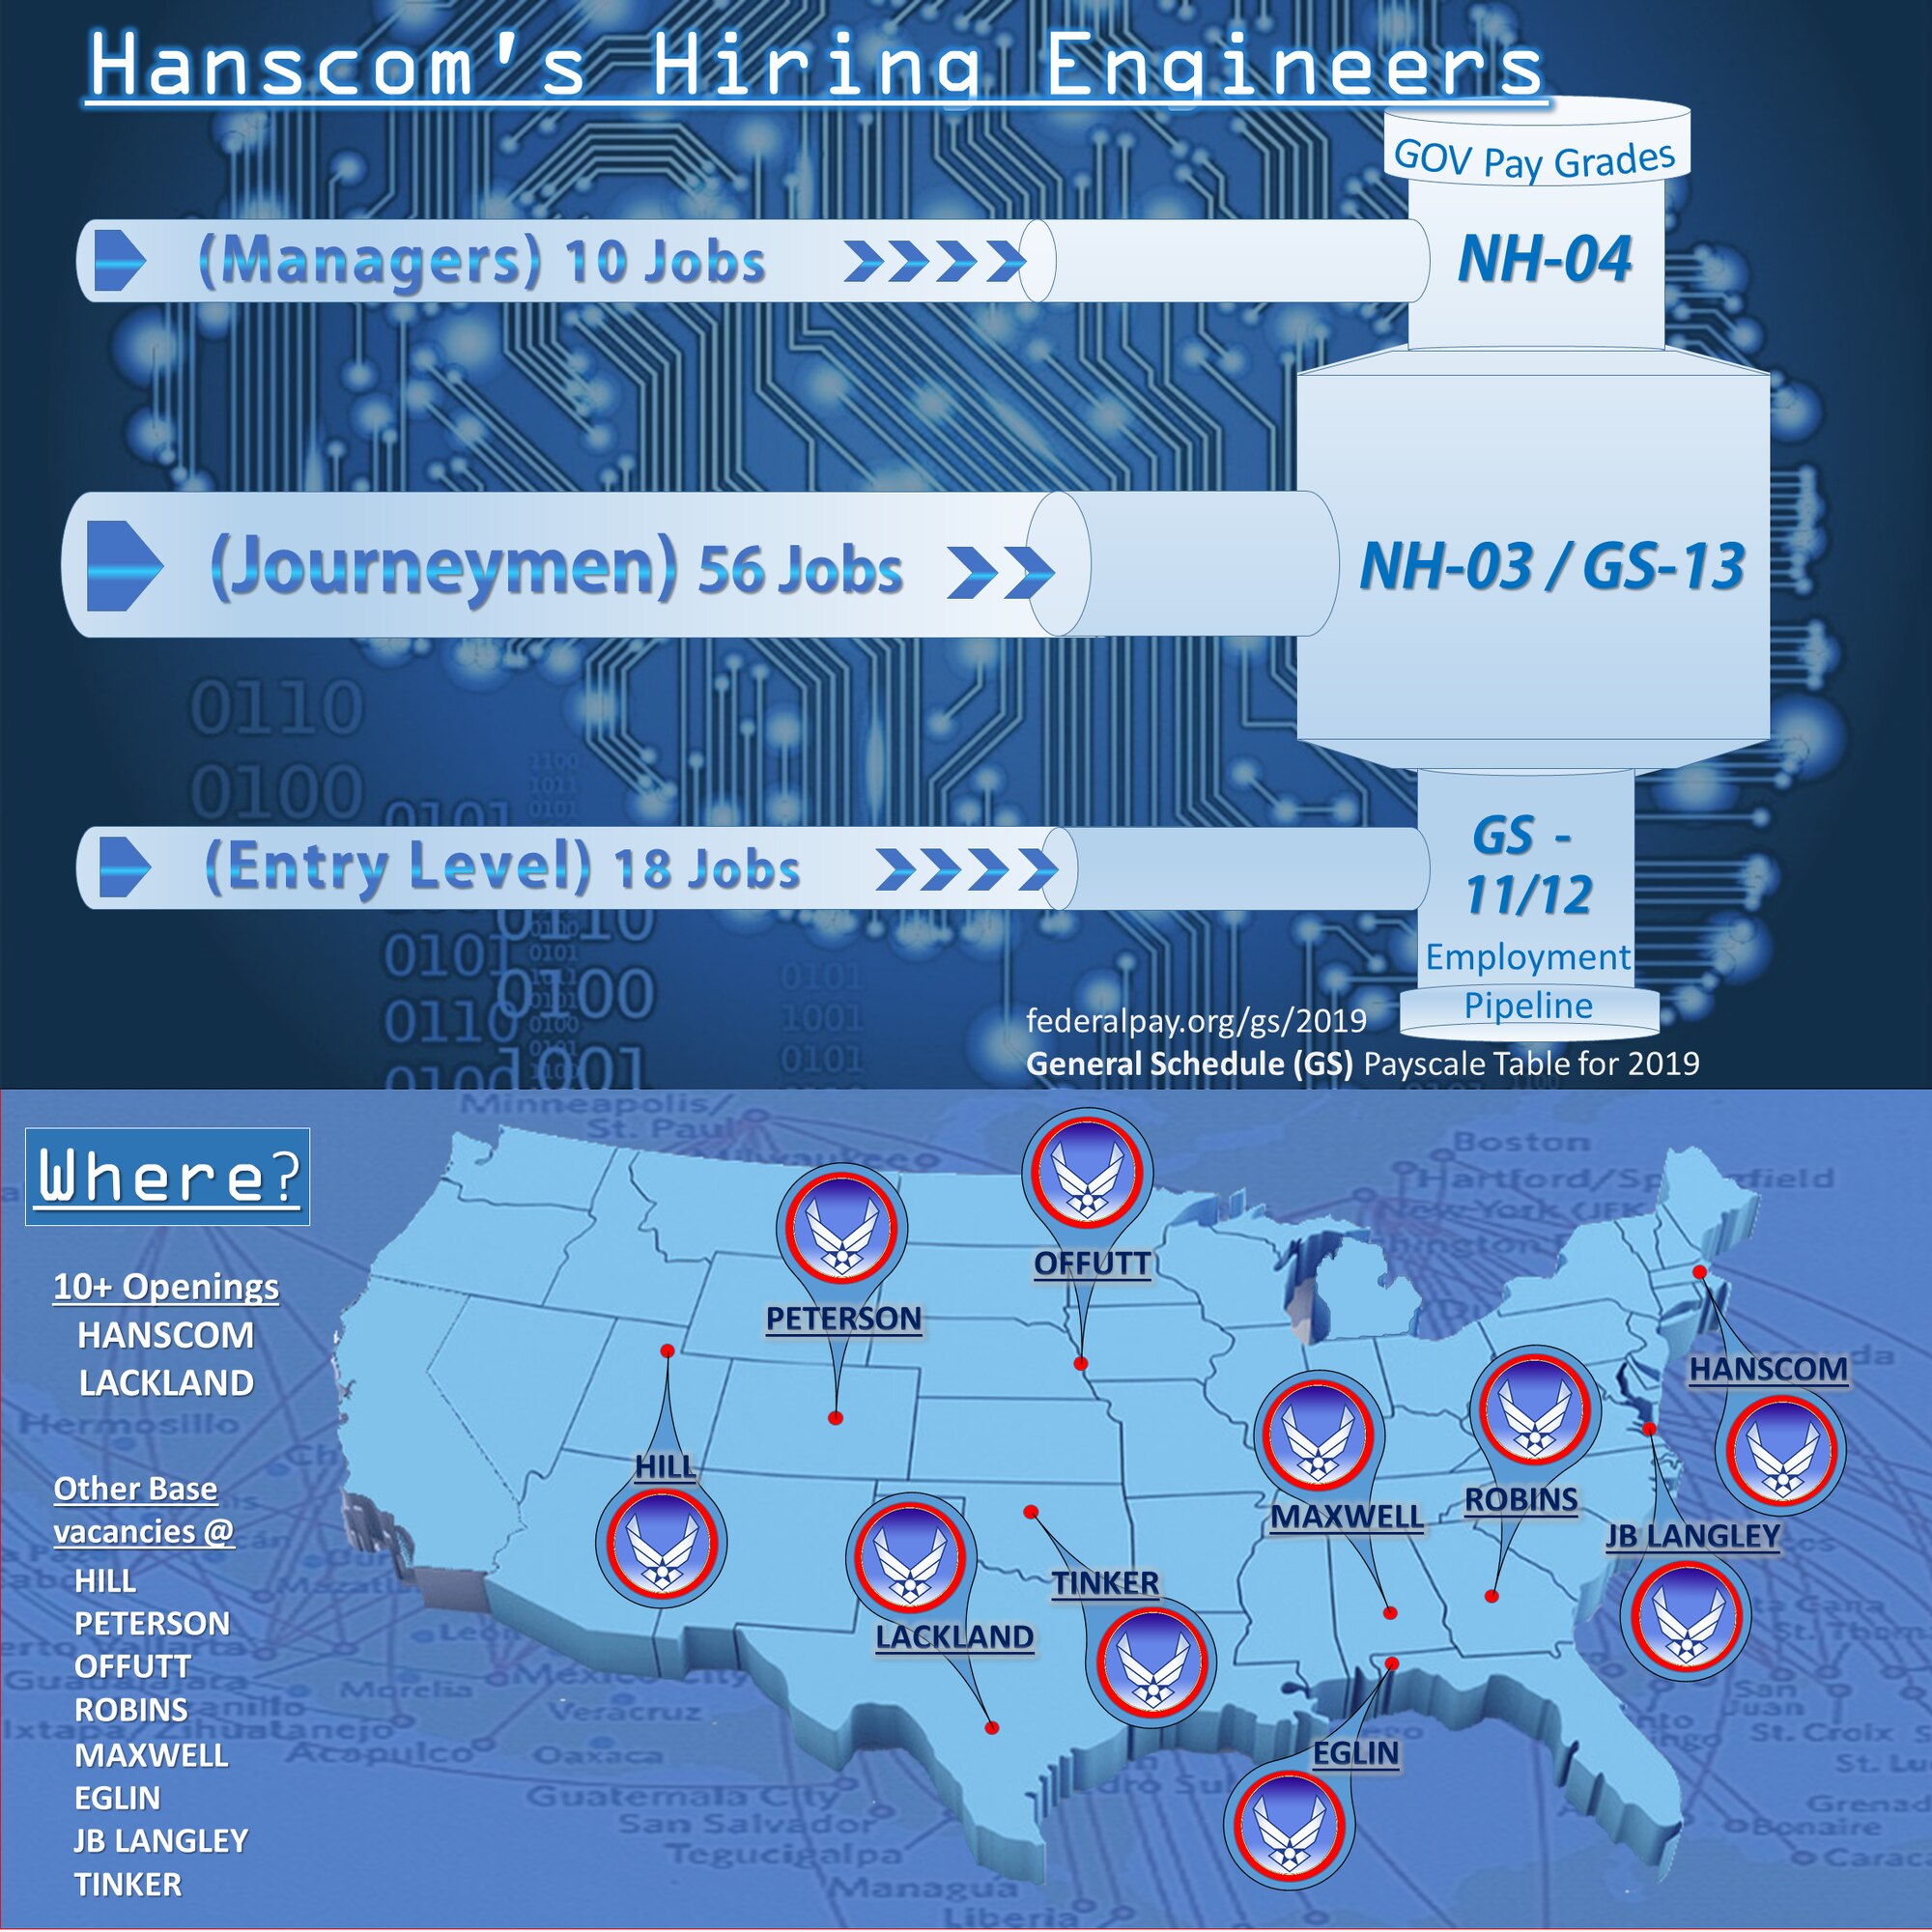 Hanscom is hanging out the help wanted sign, and seeking 75 engineers at multiple air force bases nationwide. (U.S. Air Force graphic by Lance Beebe)